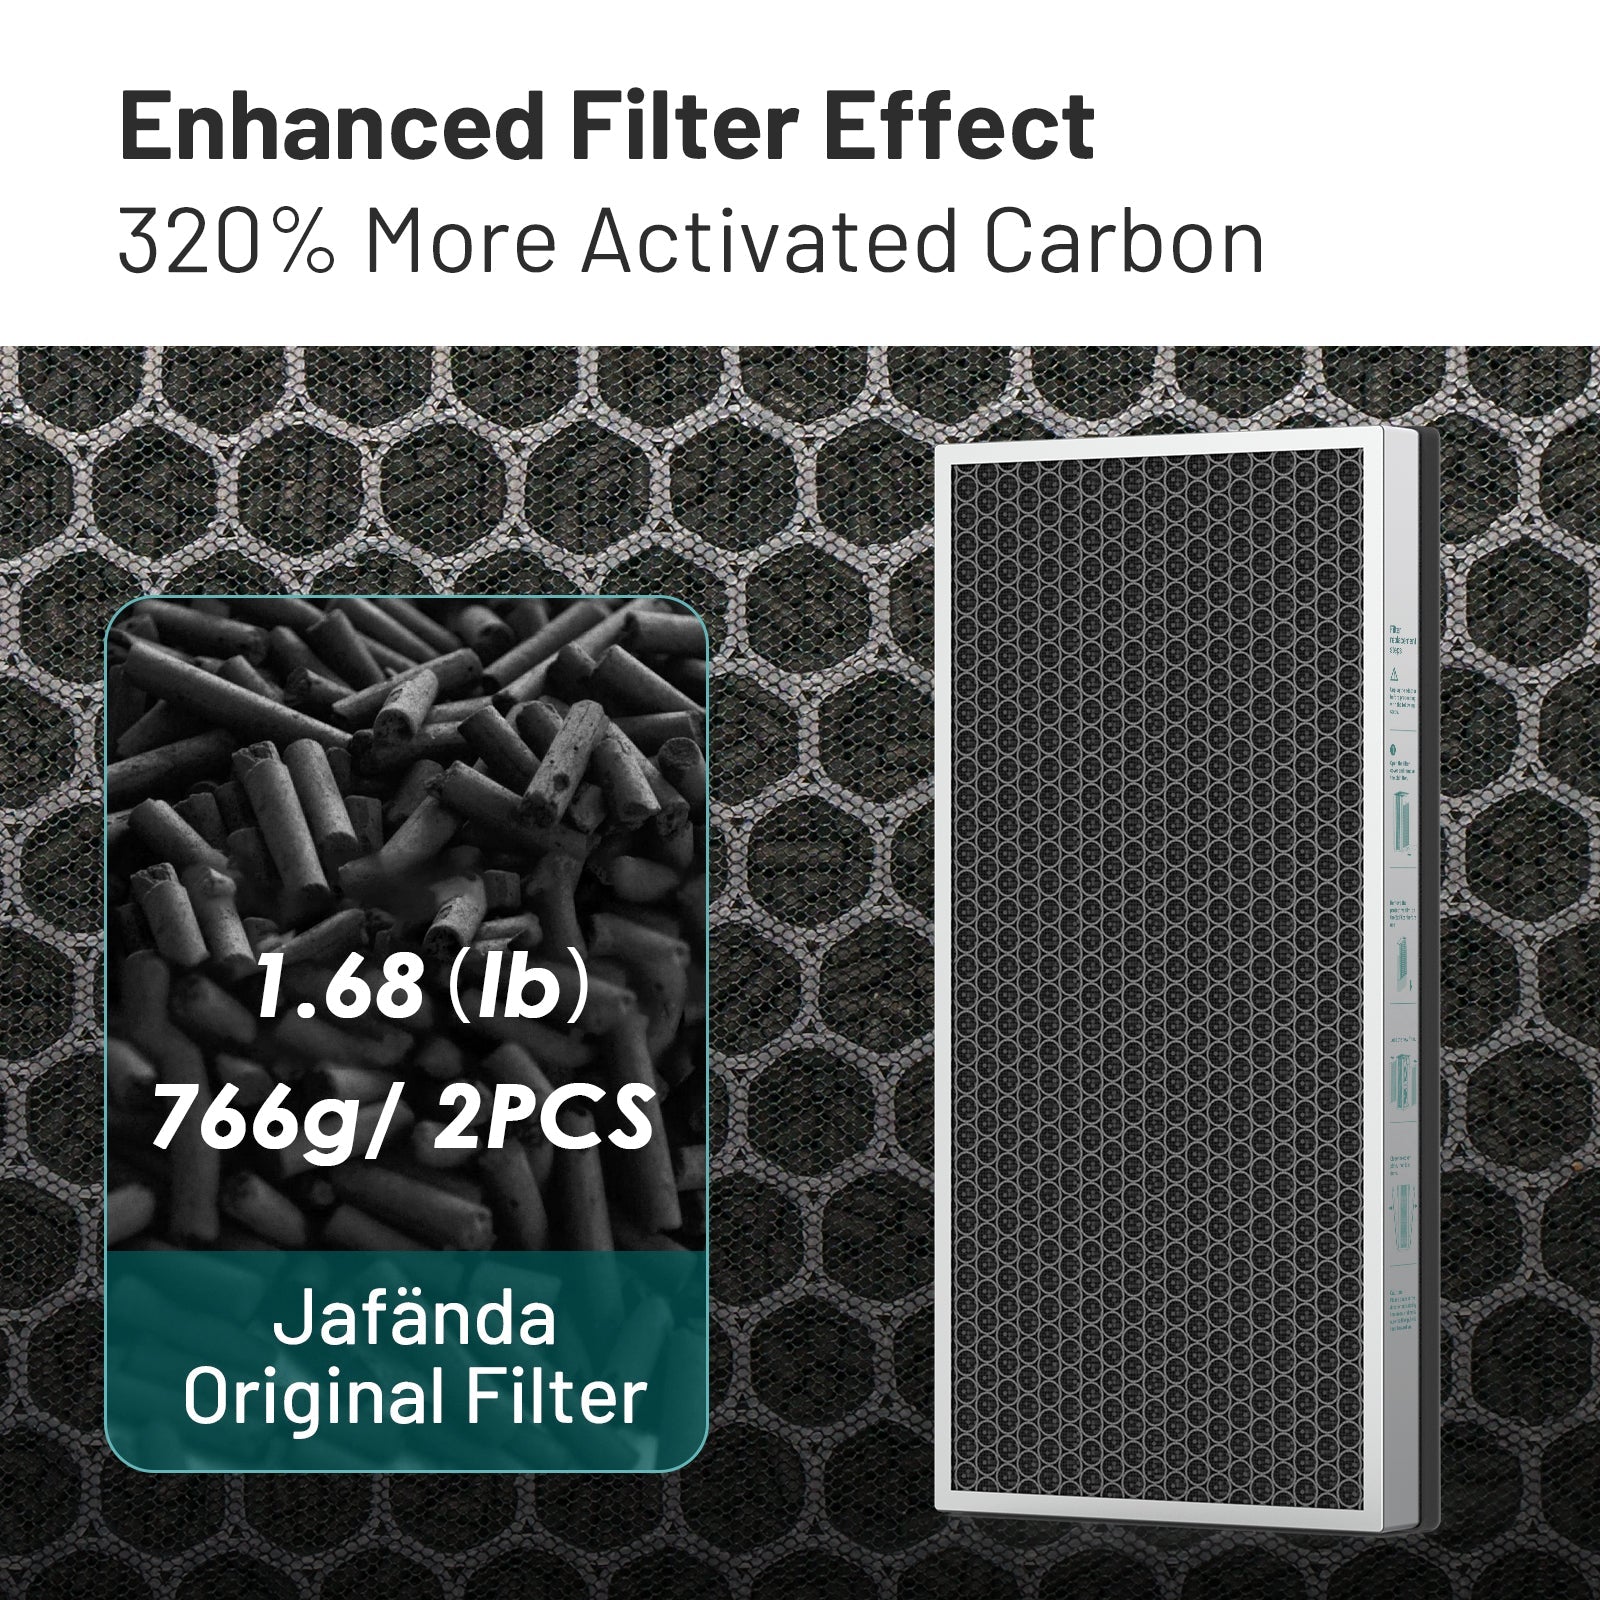 JF999 Air Purifier Filter Replacement - 2X H13 True HEPA Filters + 3.38 lb Activated Carbon - Removes 99.7% of Smoke, Dust, Pollen, and Odors - Jafanda